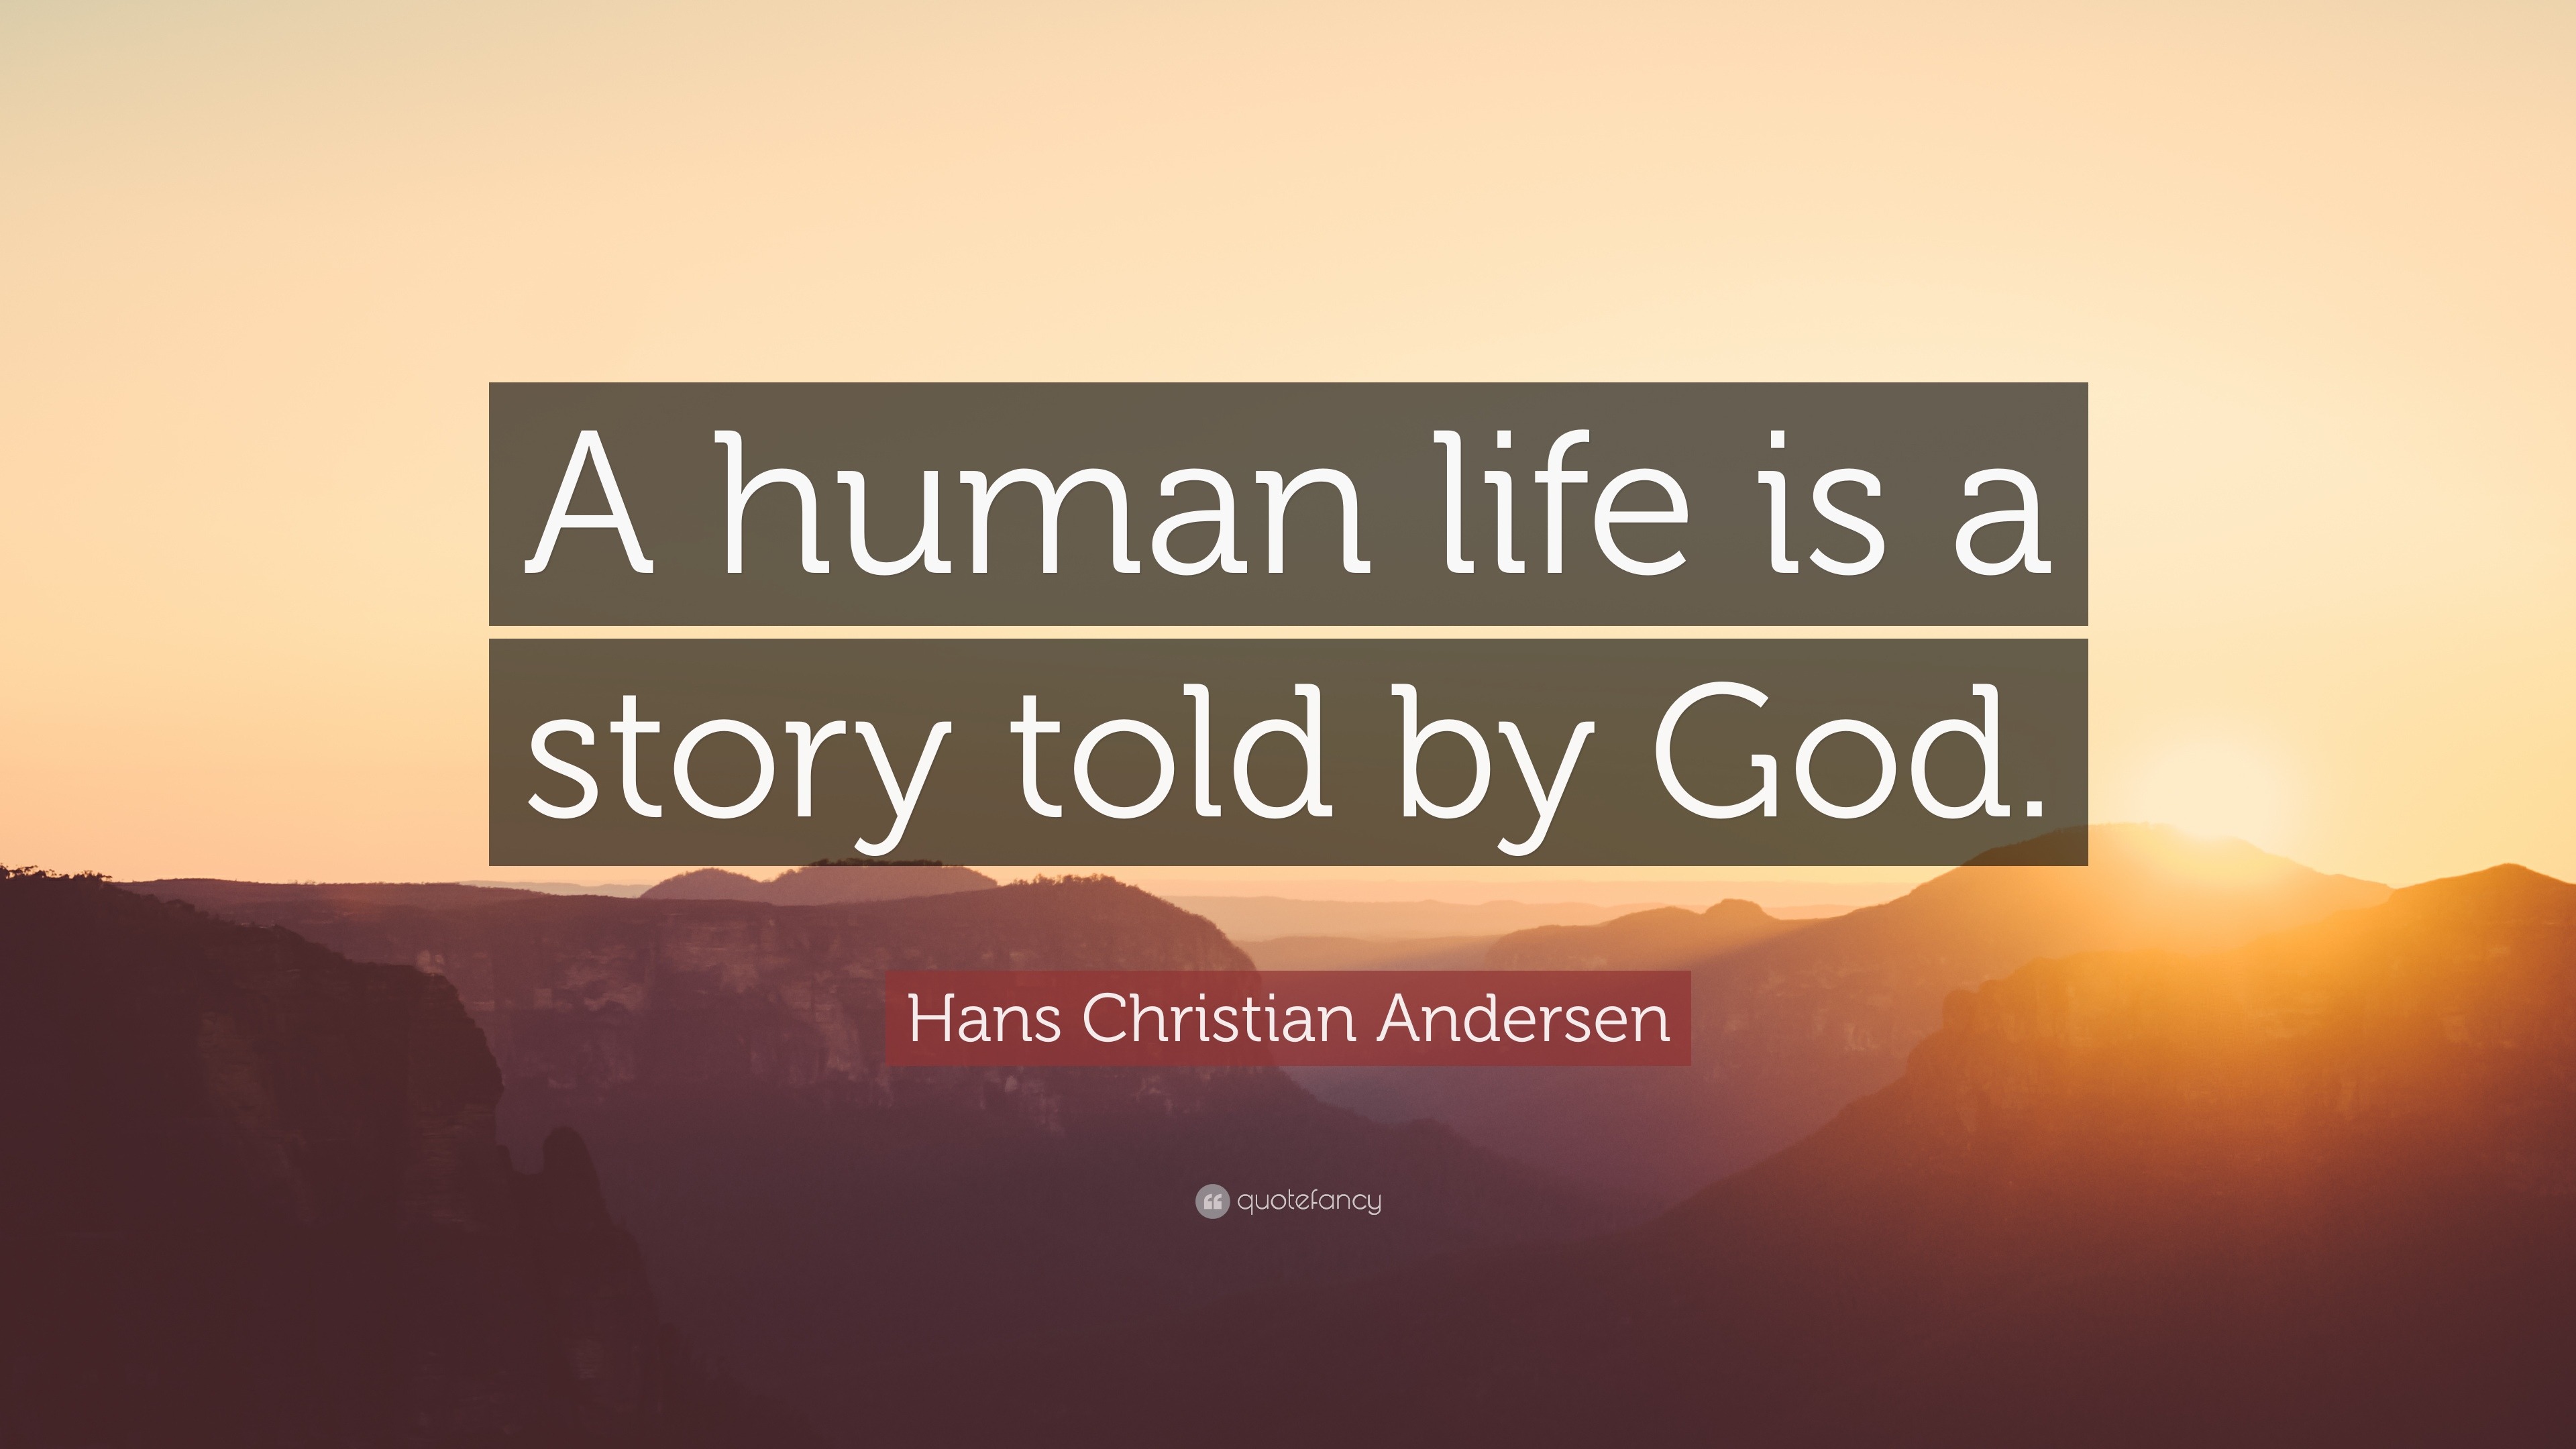 Hans Christian Andersen Quote: “A human life is a story told by God